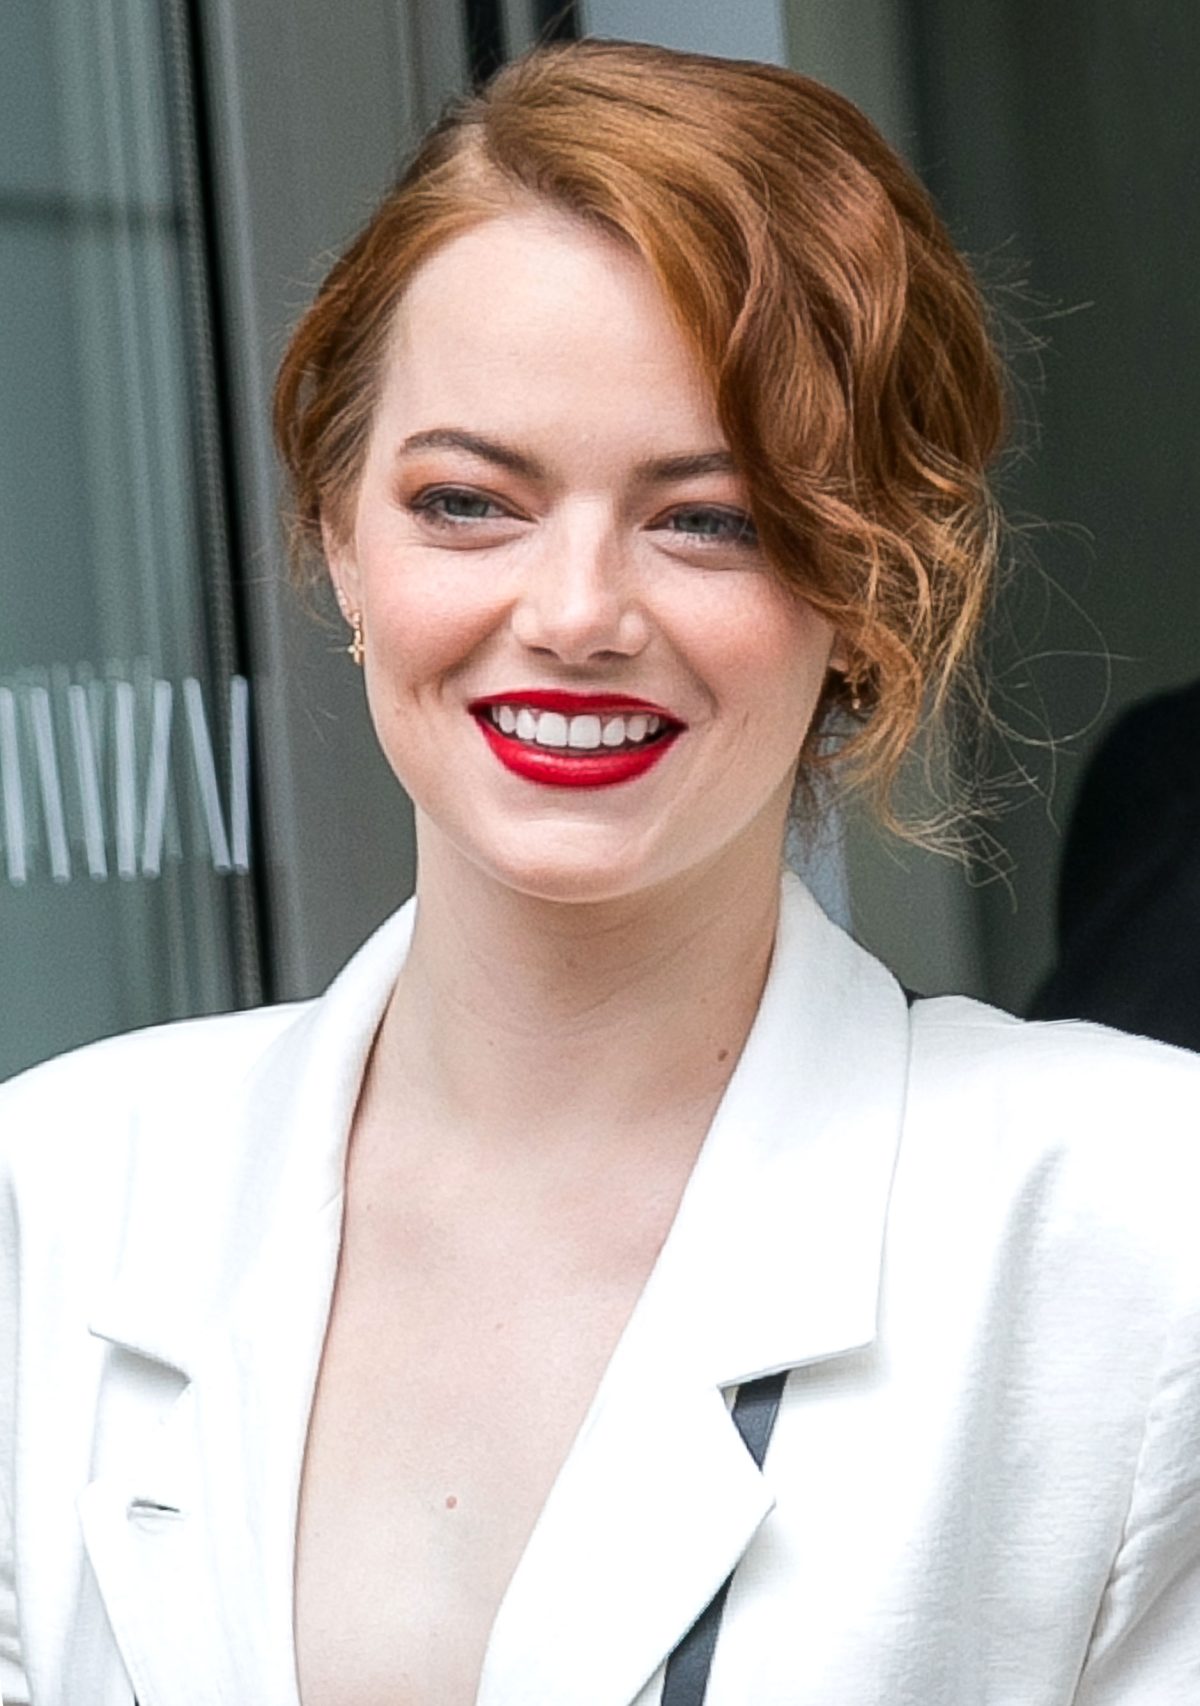 Louis Vuitton releases their latest advertising campaign starring Emma  Stone - The Glass Magazine